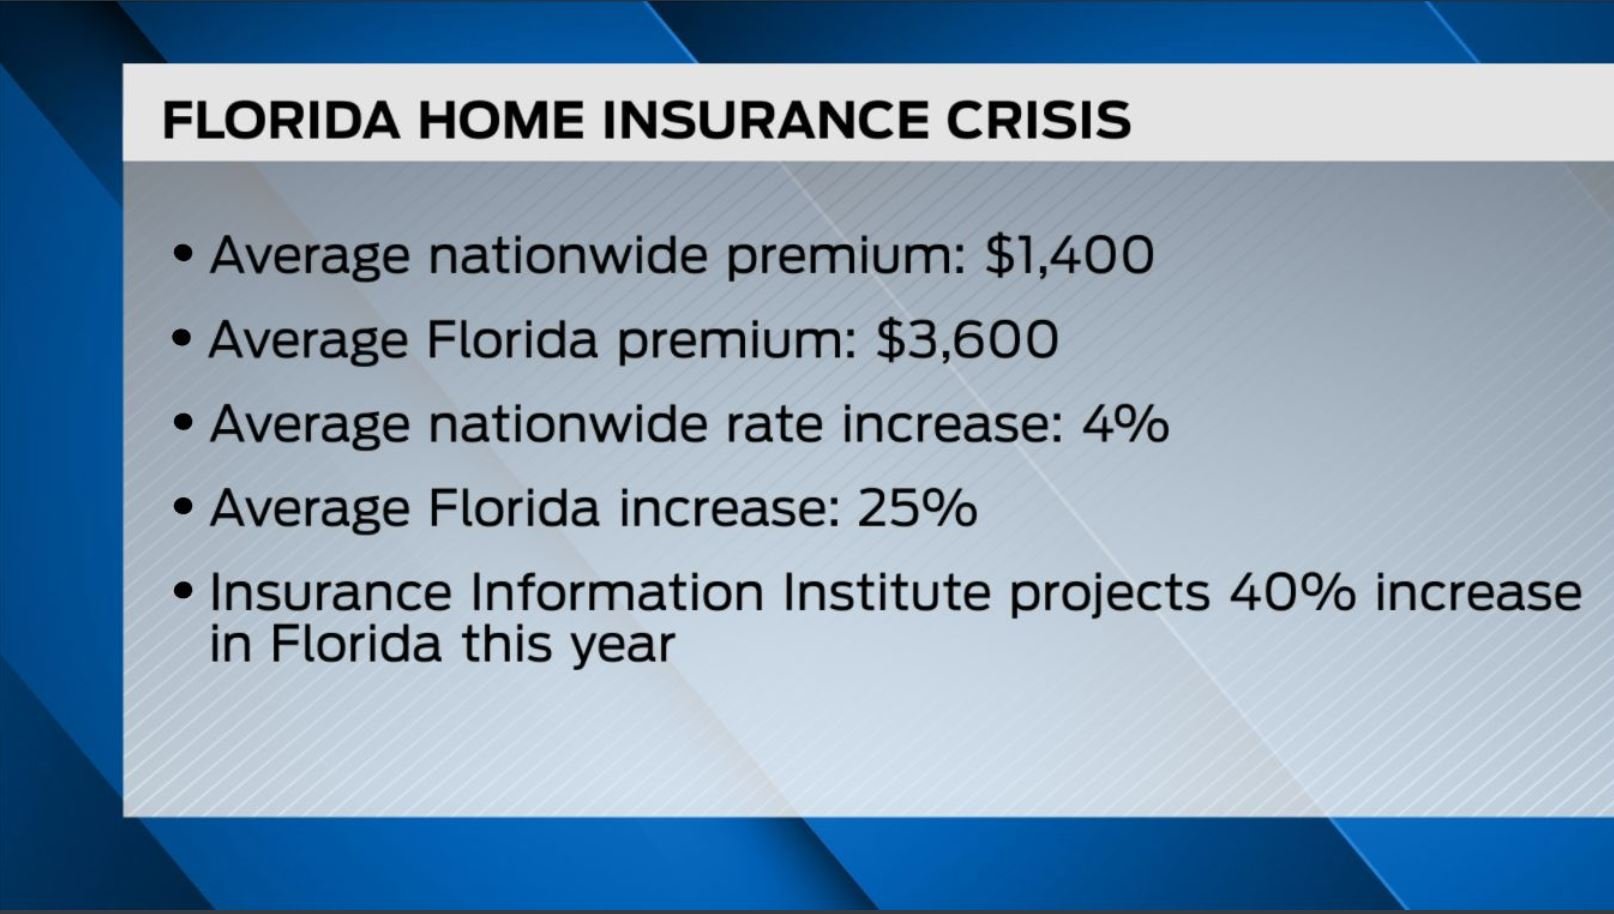 Florida's home insurance premiums skyrocketed compared to the rest of the nation.